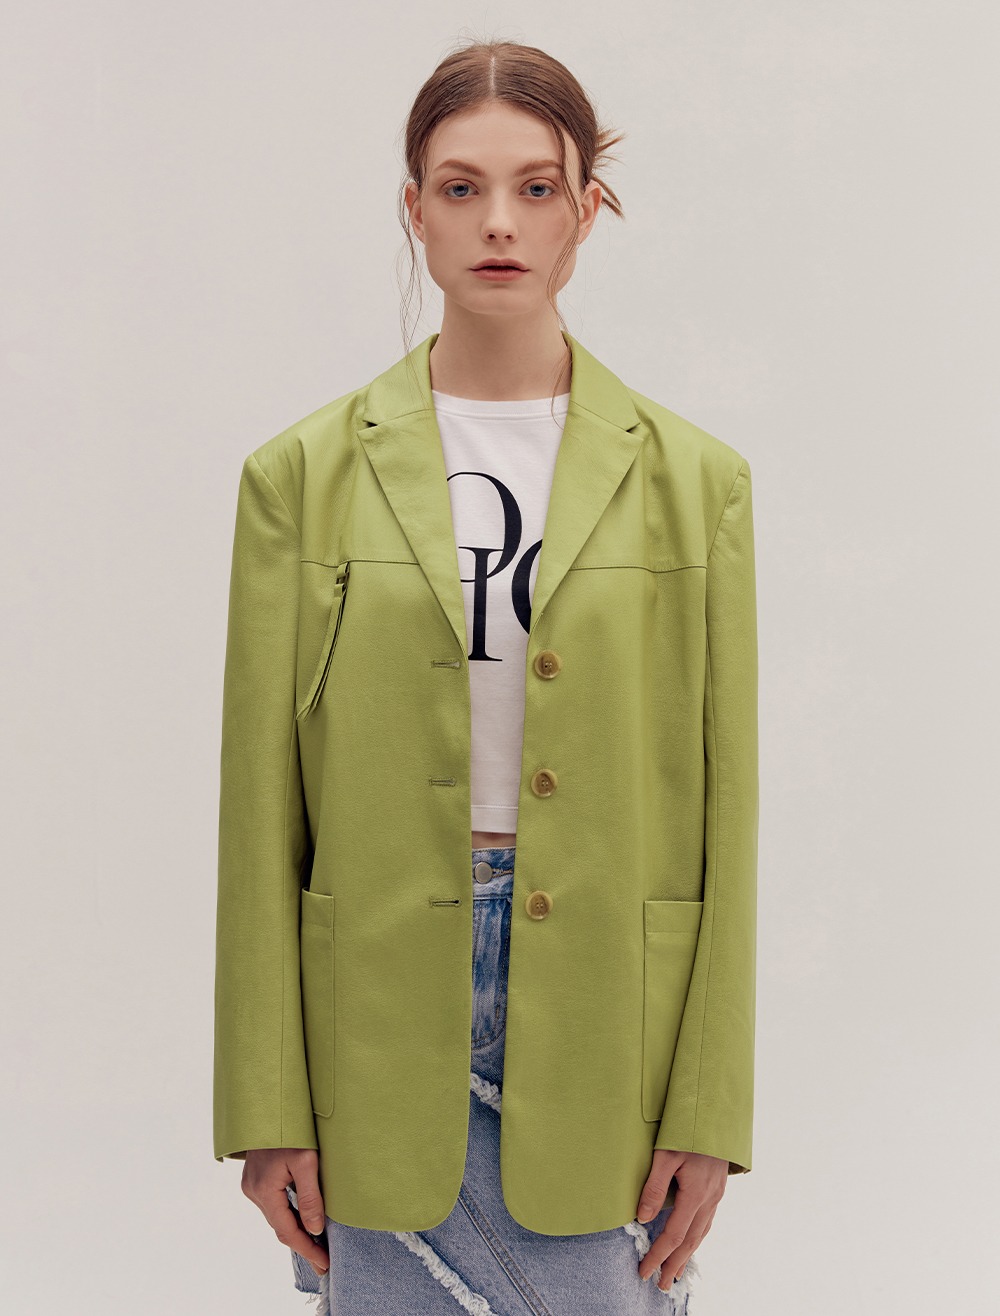 FAUX LEATHER JACKET [GREEN]